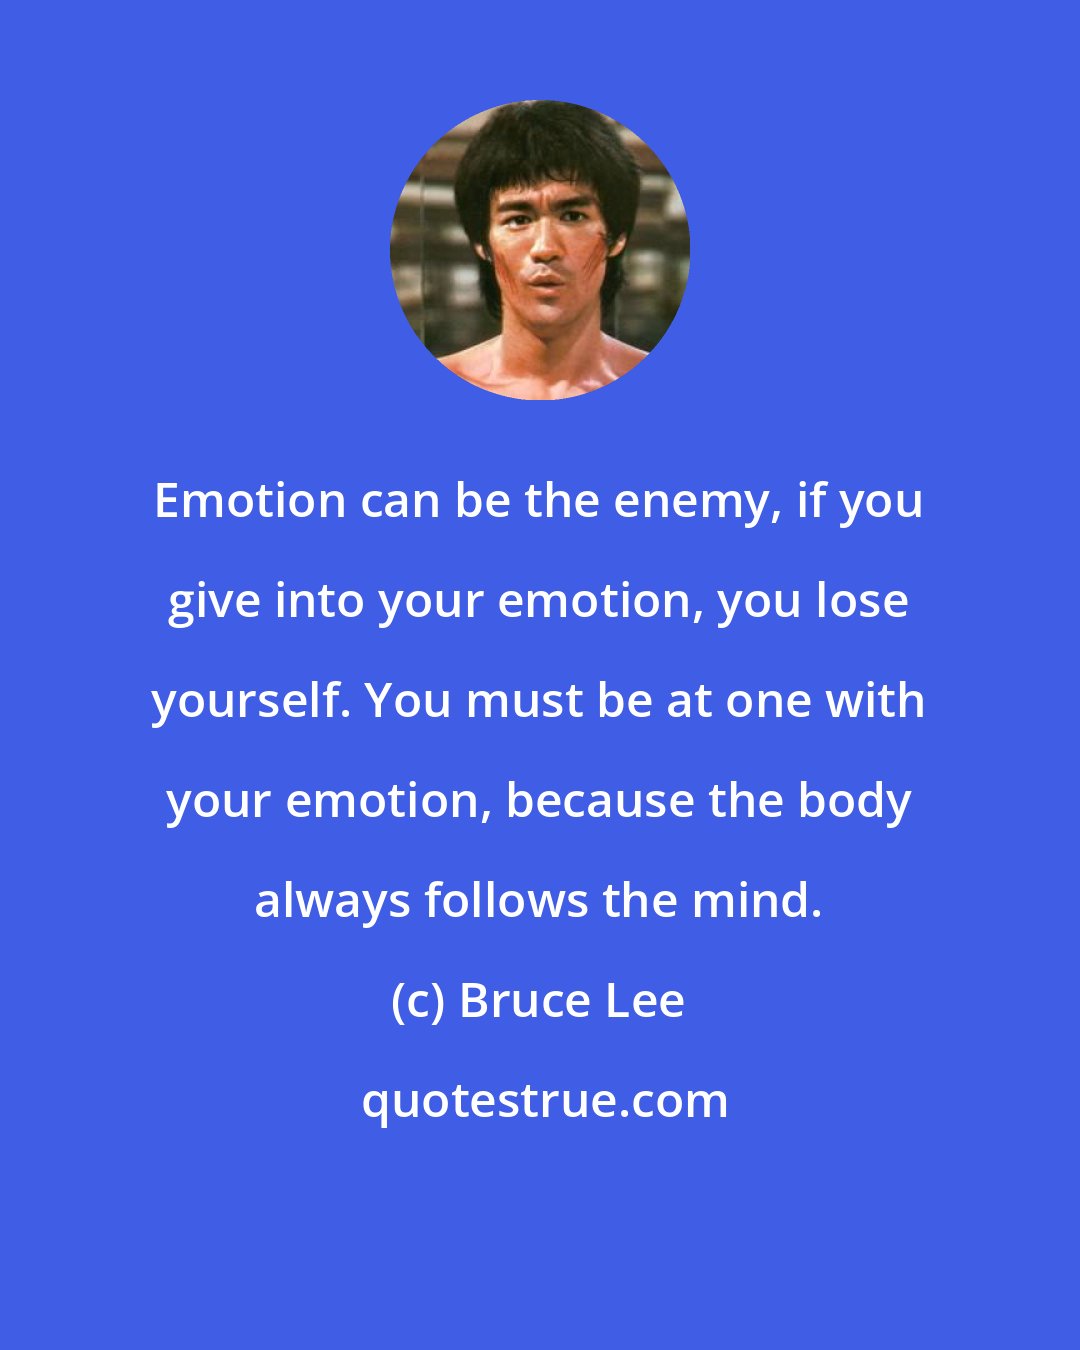 Bruce Lee: Emotion can be the enemy, if you give into your emotion, you lose yourself. You must be at one with your emotion, because the body always follows the mind.